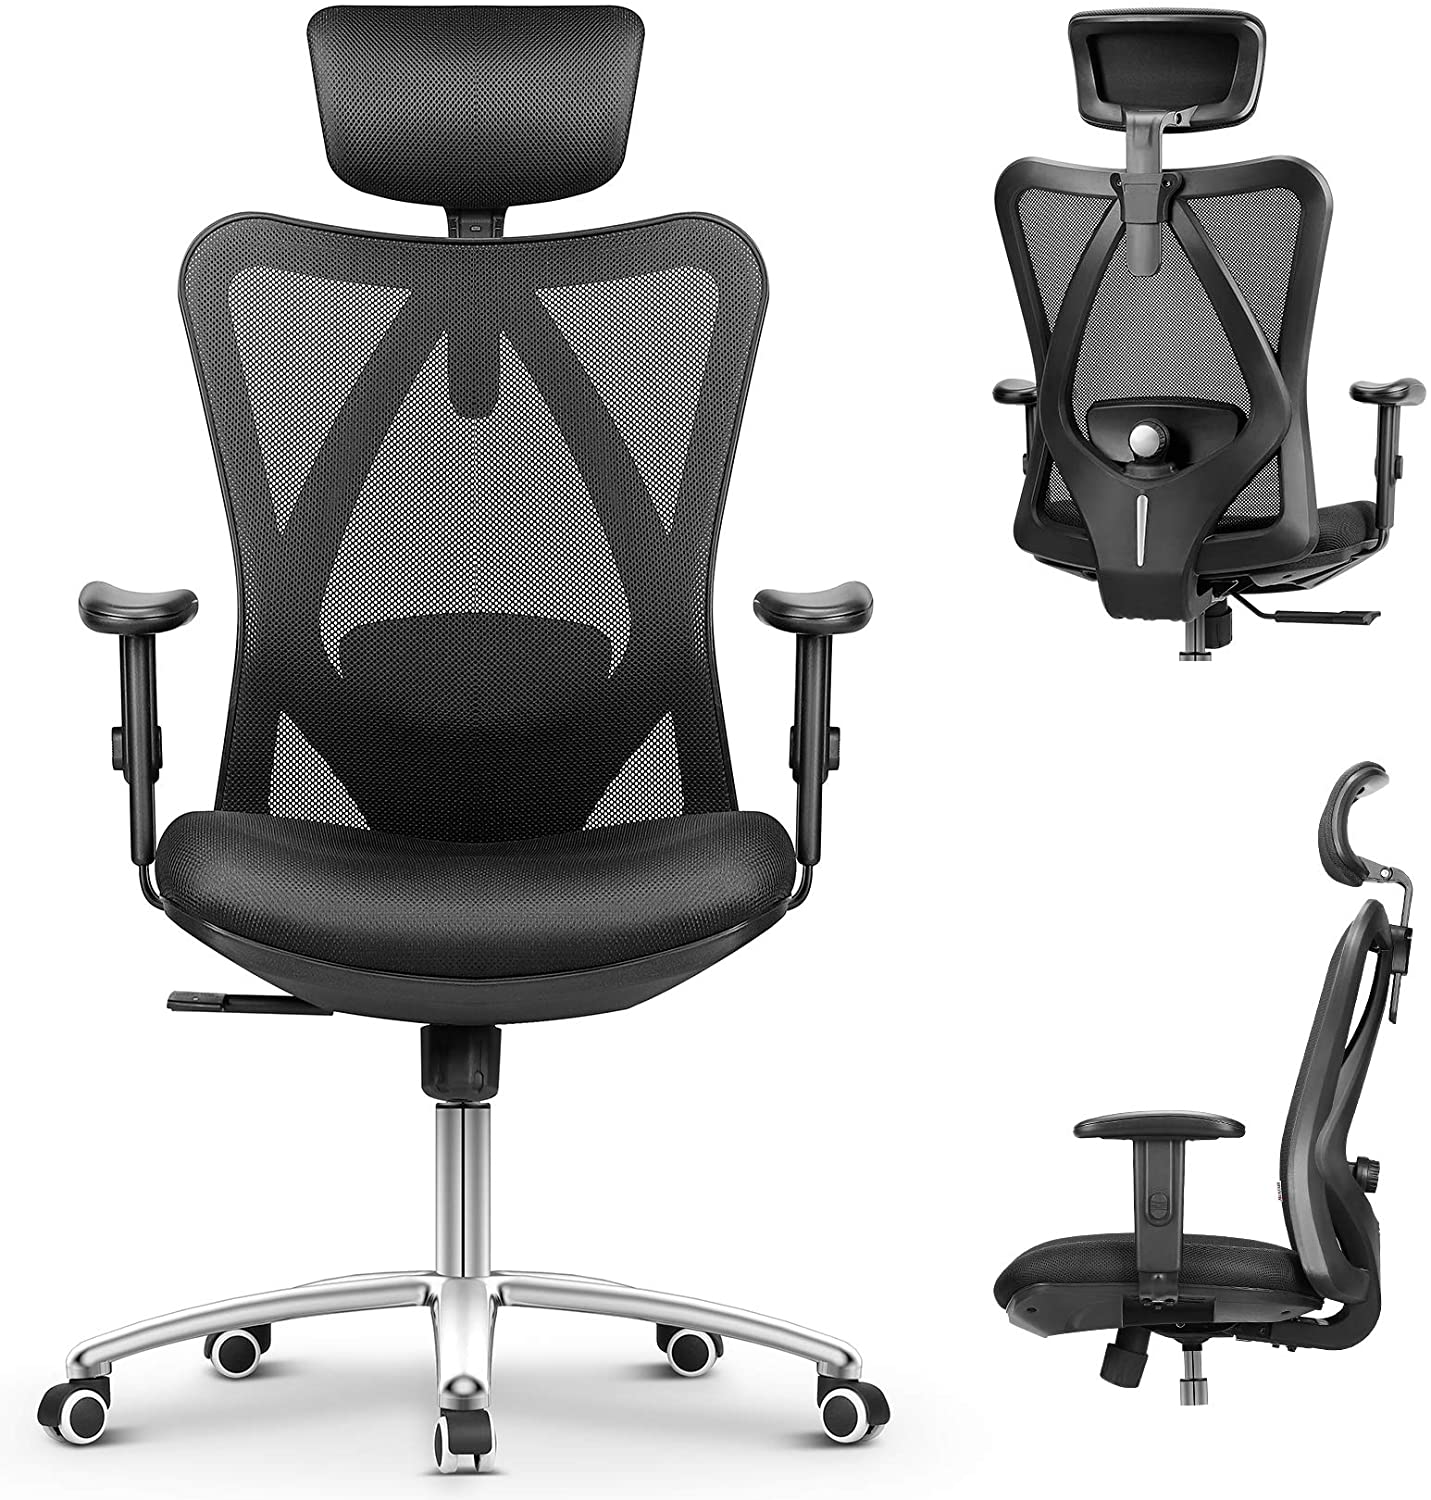 mfavour Office Chair Ergonomic Office Chair with with Adjustable Arms and Back Support